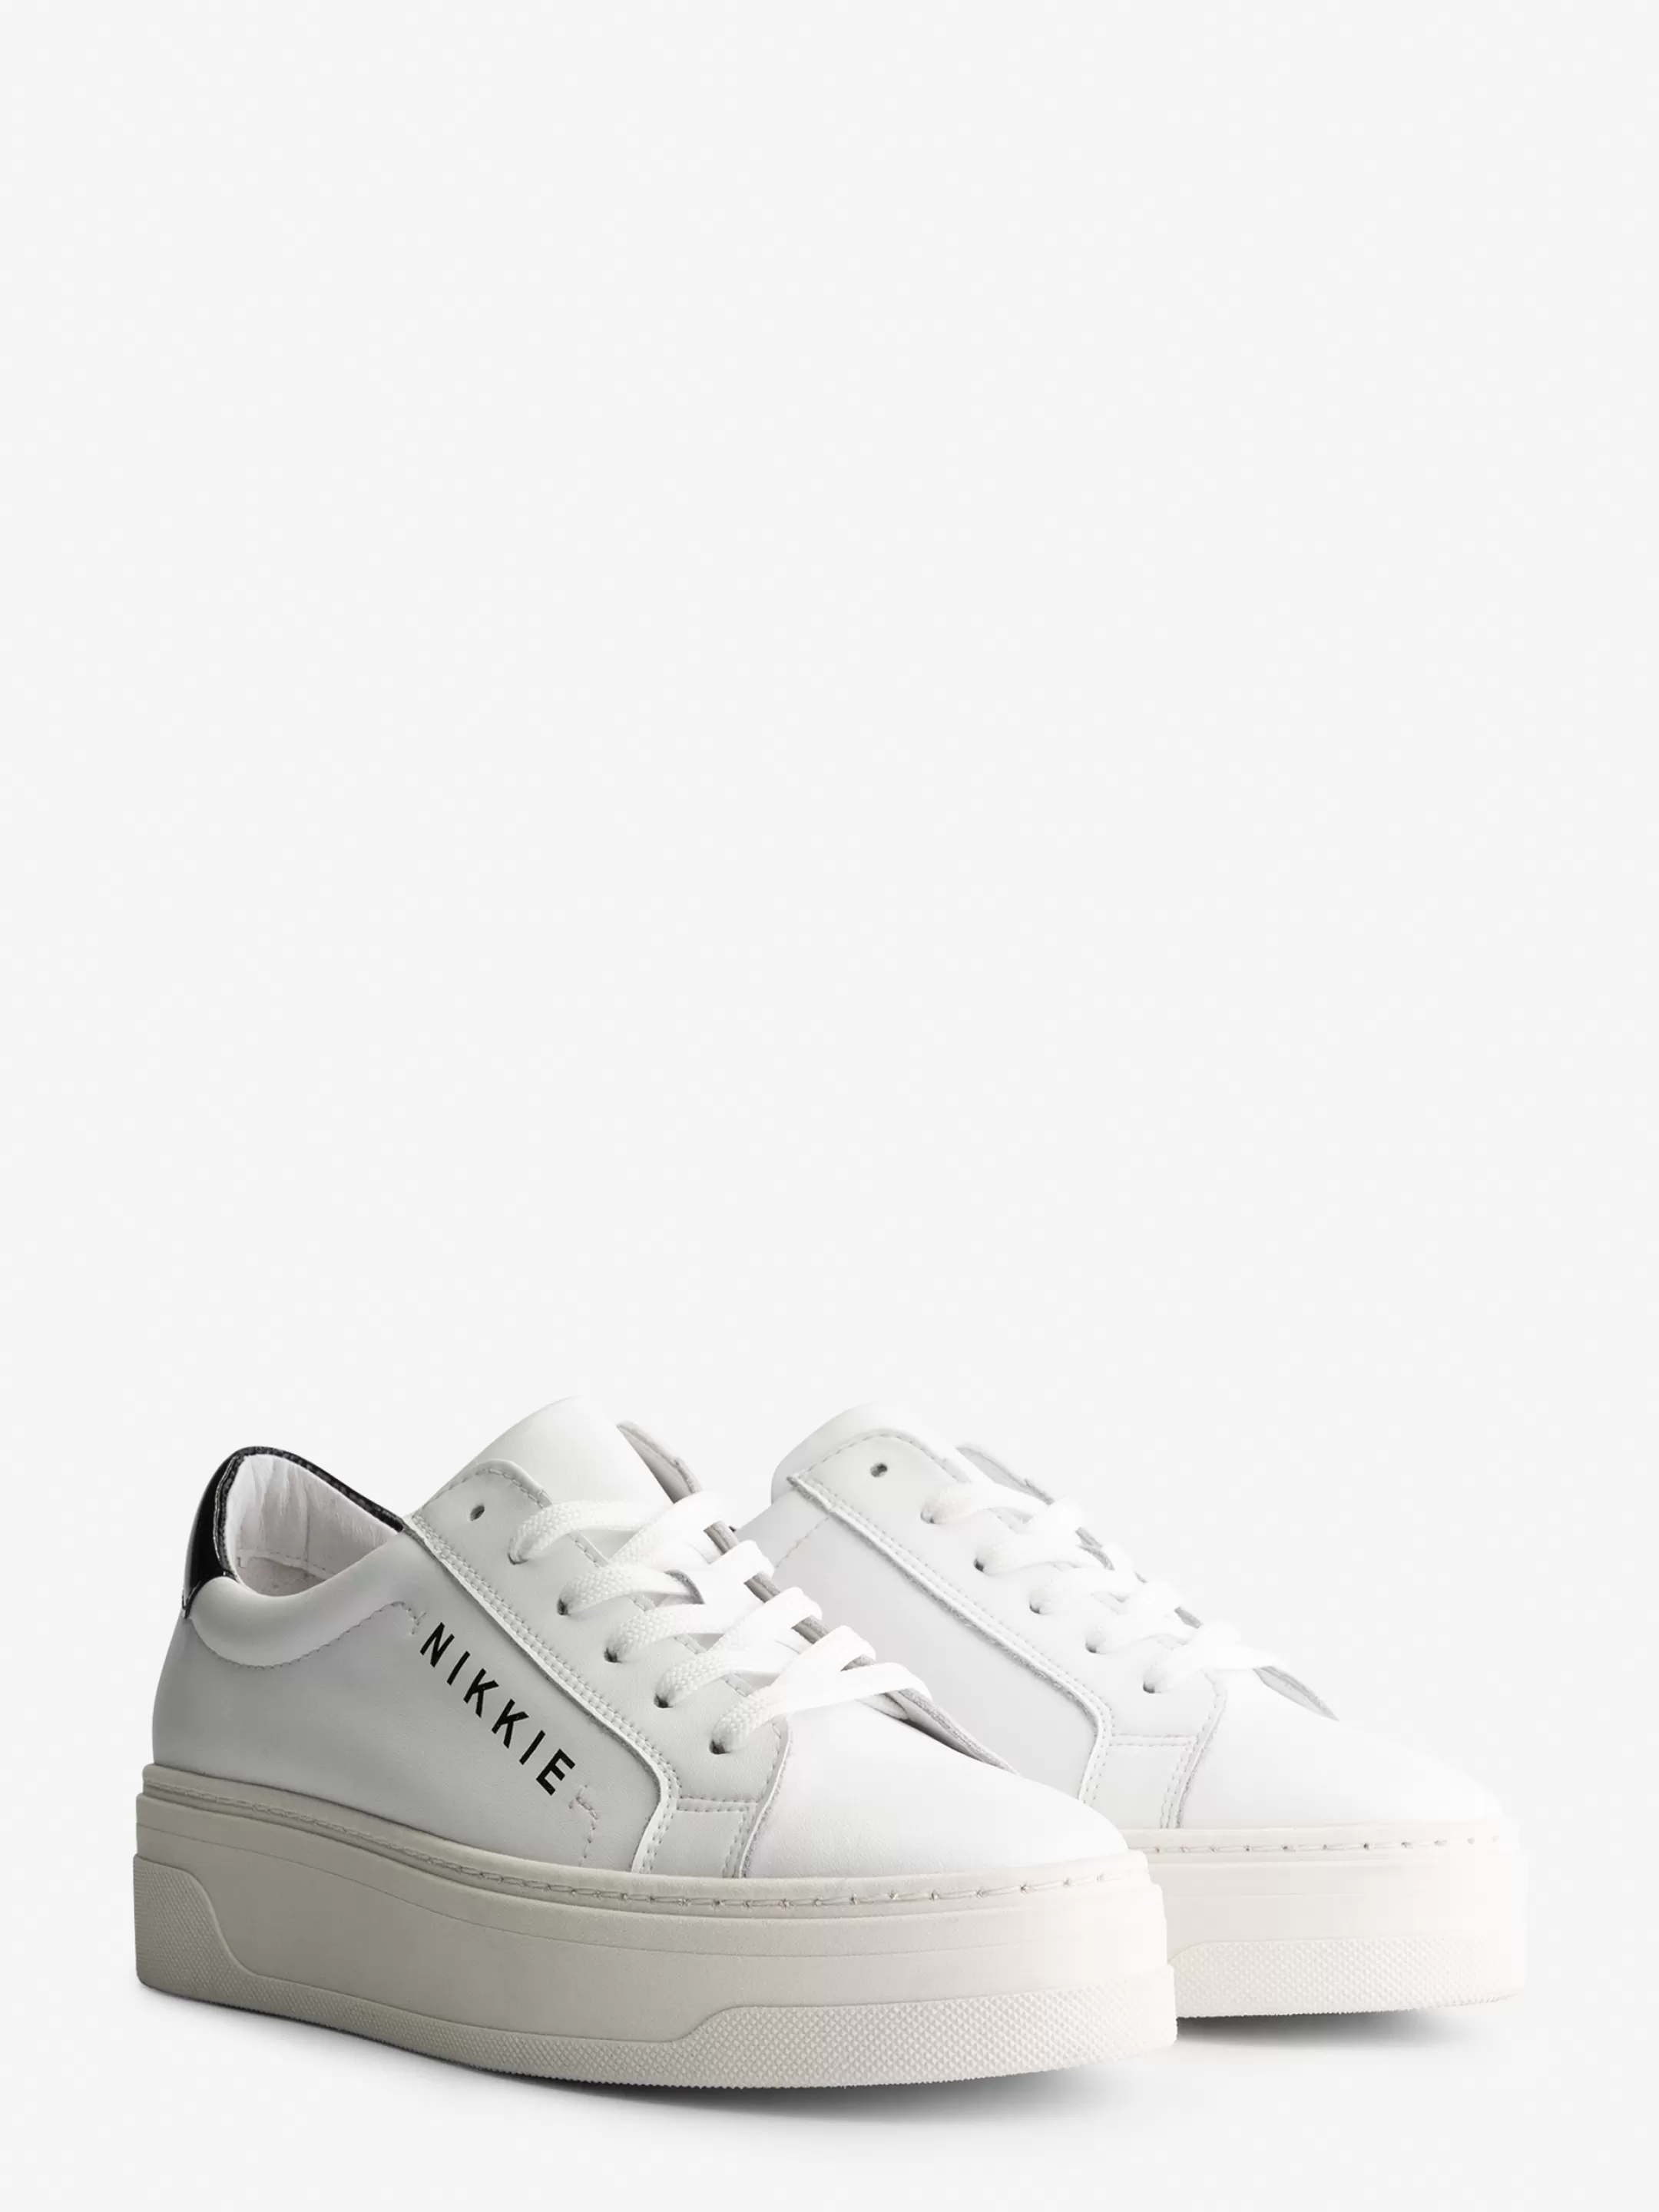 Shop NIKKIE Sneaker with gold details White